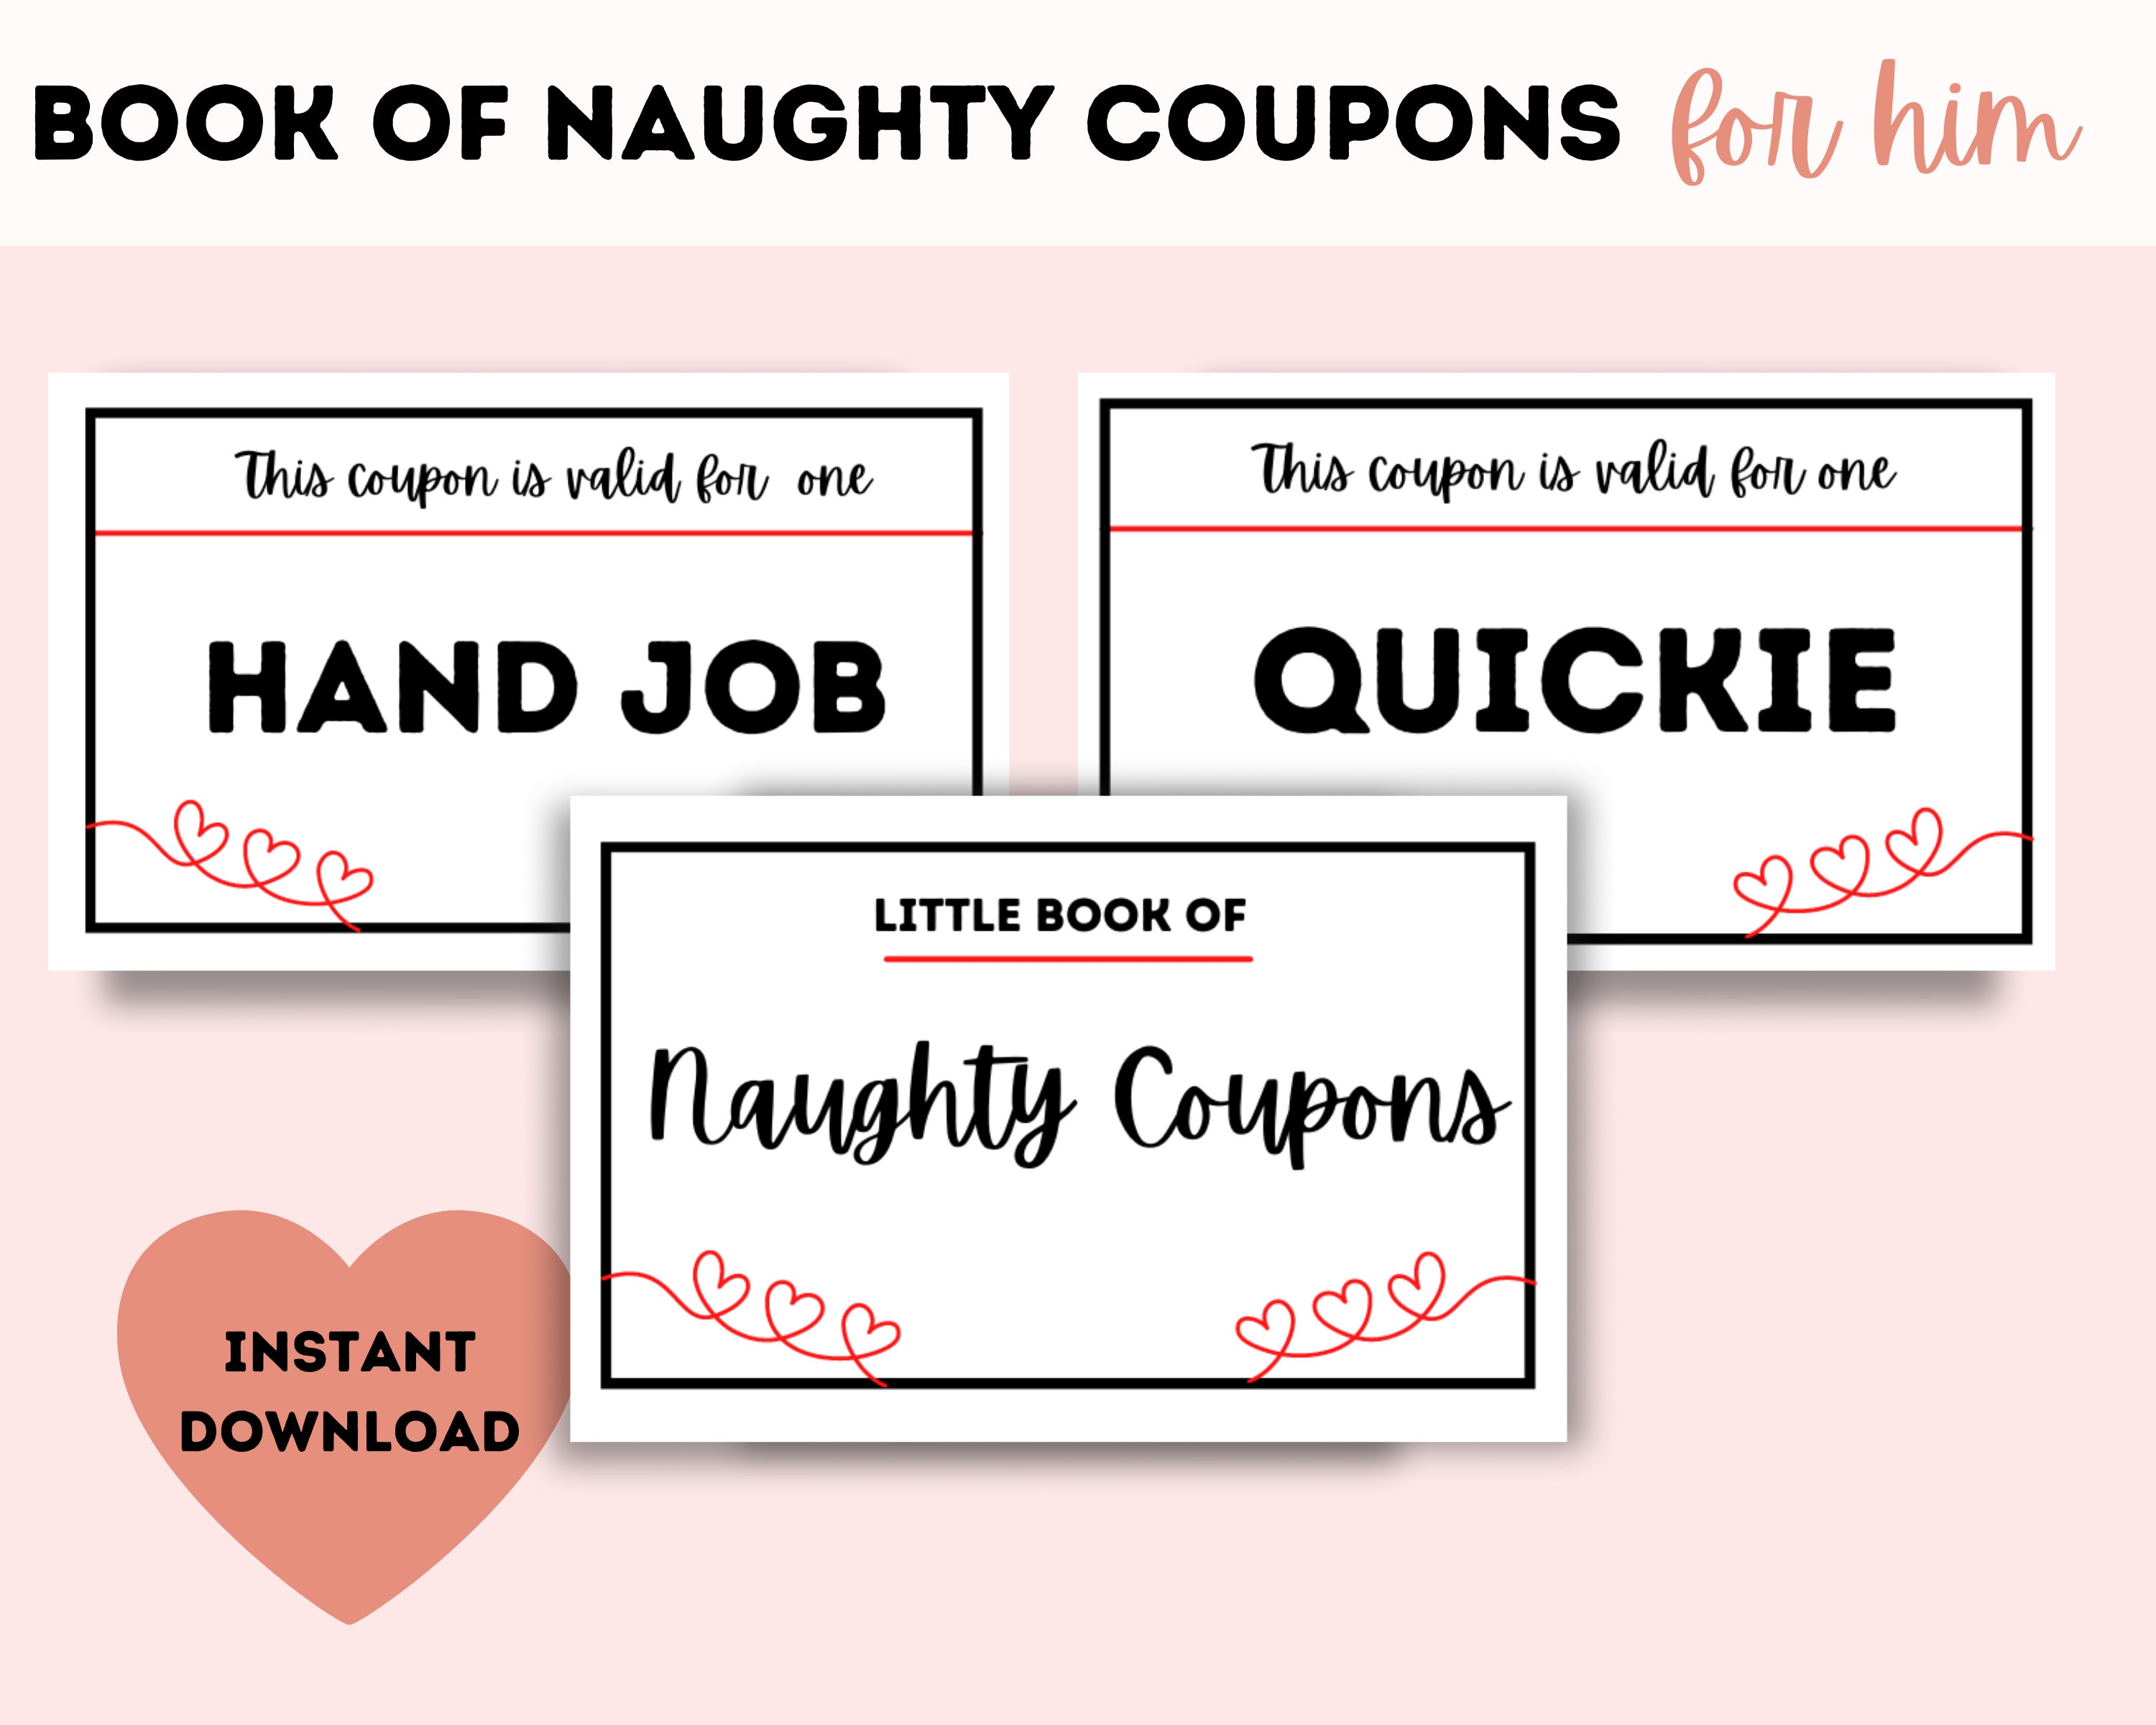 Birthday Sex Coupons Sex Coupons for Husband Birthday Gift